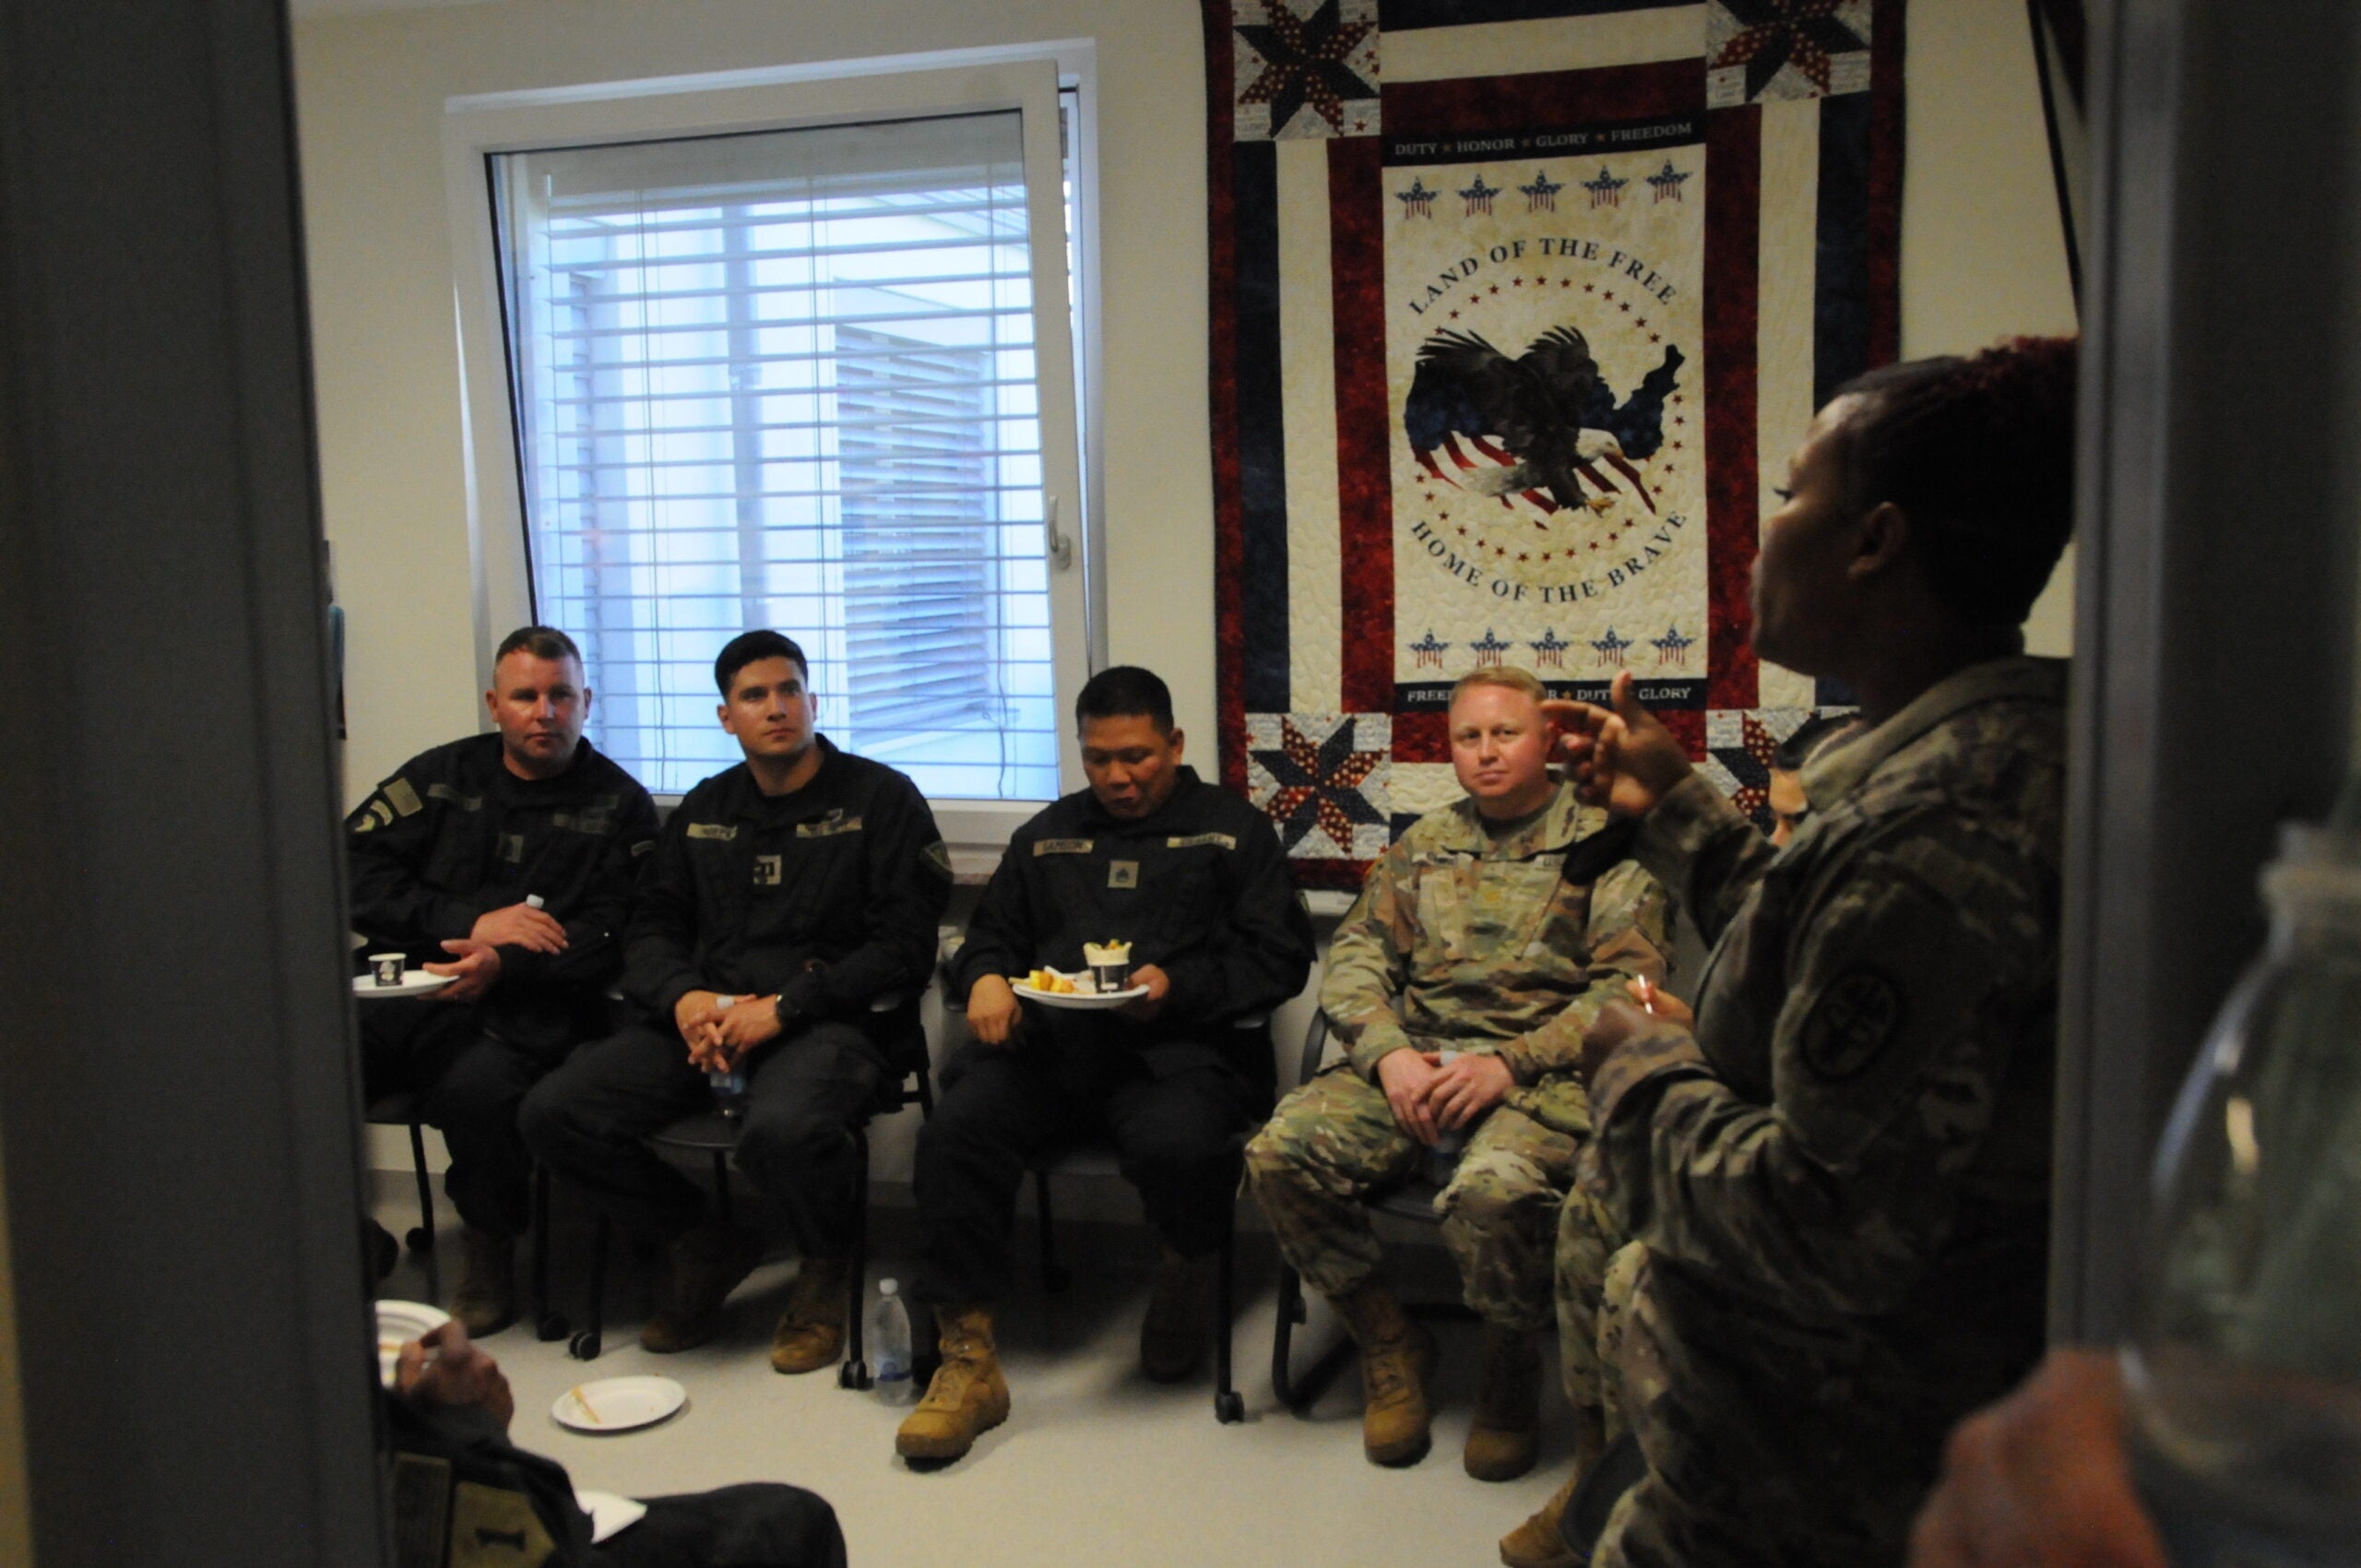 Lt. Col. Marlene Arias-Reynoso, behavioral health director of U.S. Army Health Clinic Hohenfels, led discussions with leaders from 1st Battalion 4th Infantry Regiment, Department of Emergency Services, and the Joint Multinational  Readiness Center in Hohenfels, to discuss Behavior Health services offered to Solders, May 19, 2022.